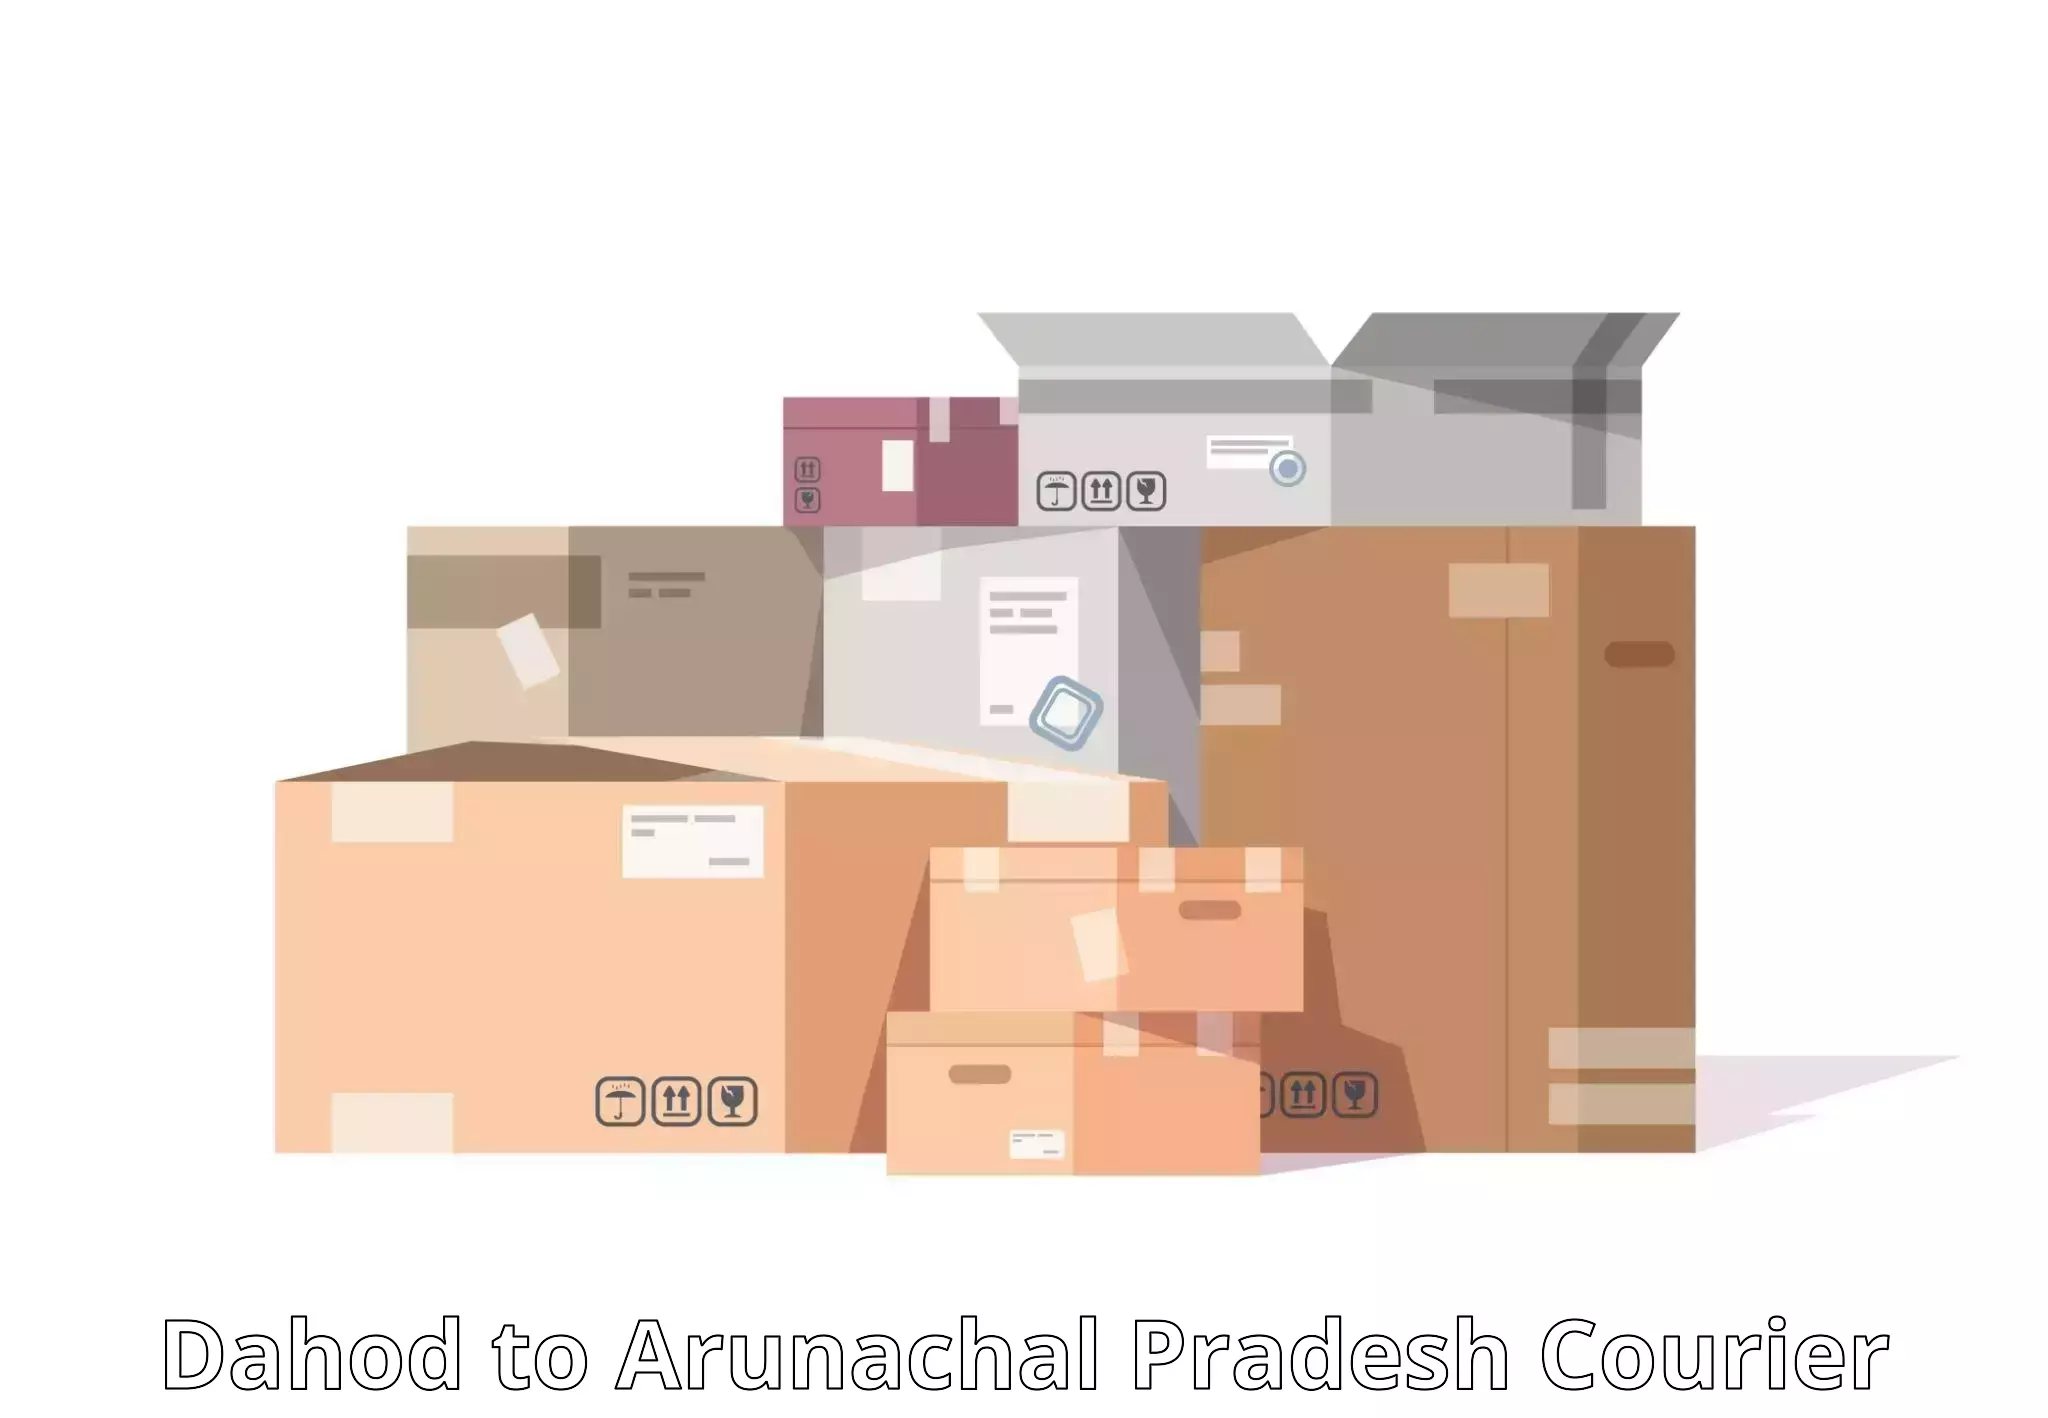 Sustainable shipping practices in Dahod to Bomdila